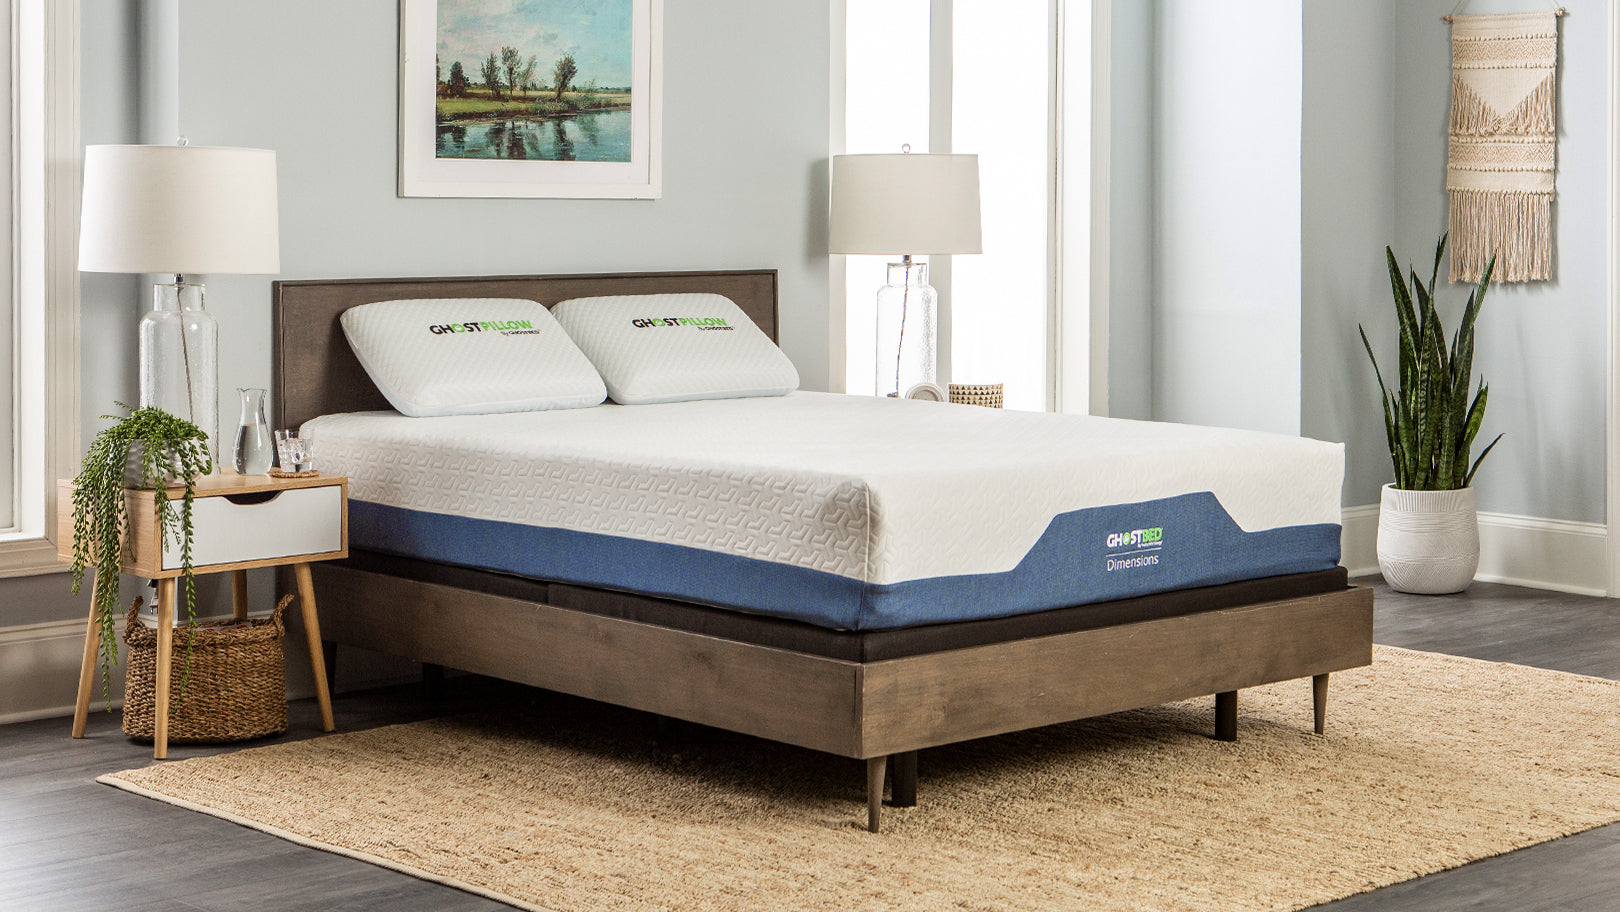 GhostBed Dimensions Mattress